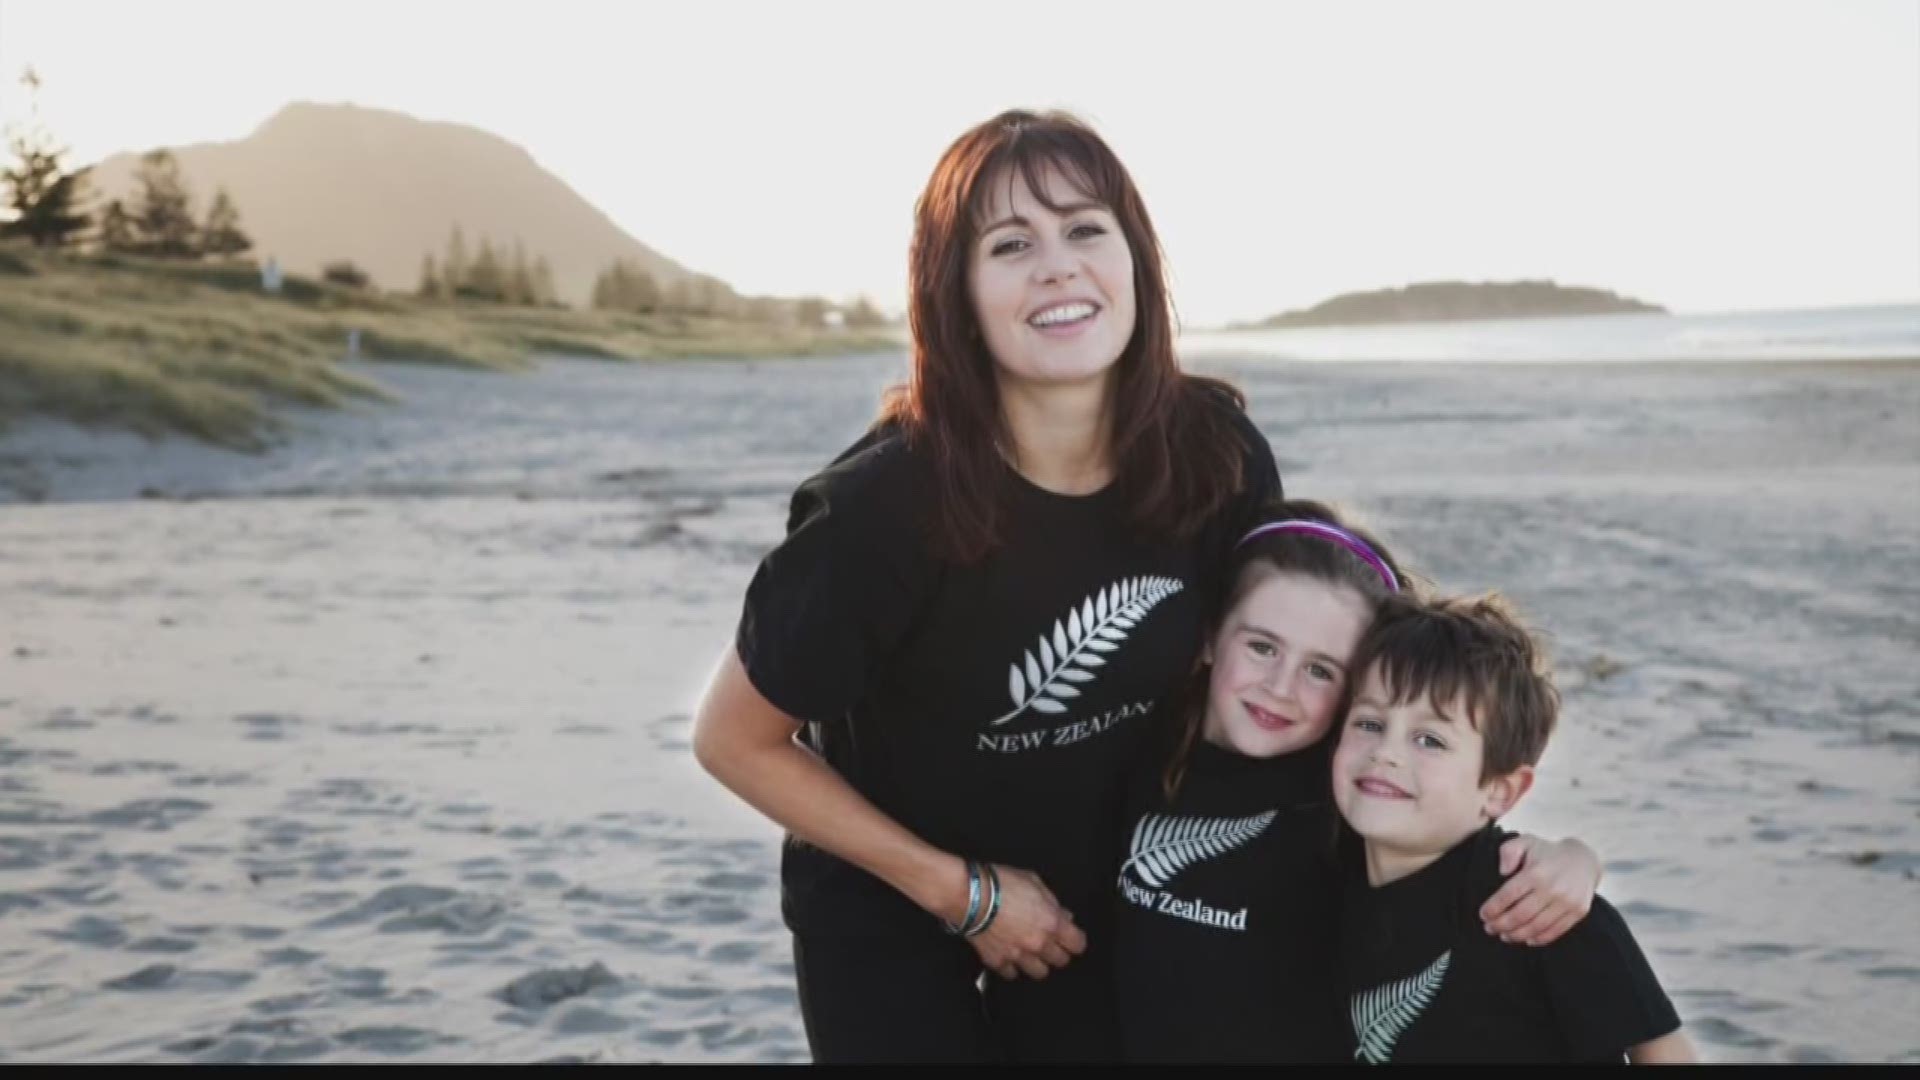 Since arriving in New Zealand almost a decade ago, the mother of two has worked as a community college instructor, freelances as a newspaper reporter and has written her memoir.